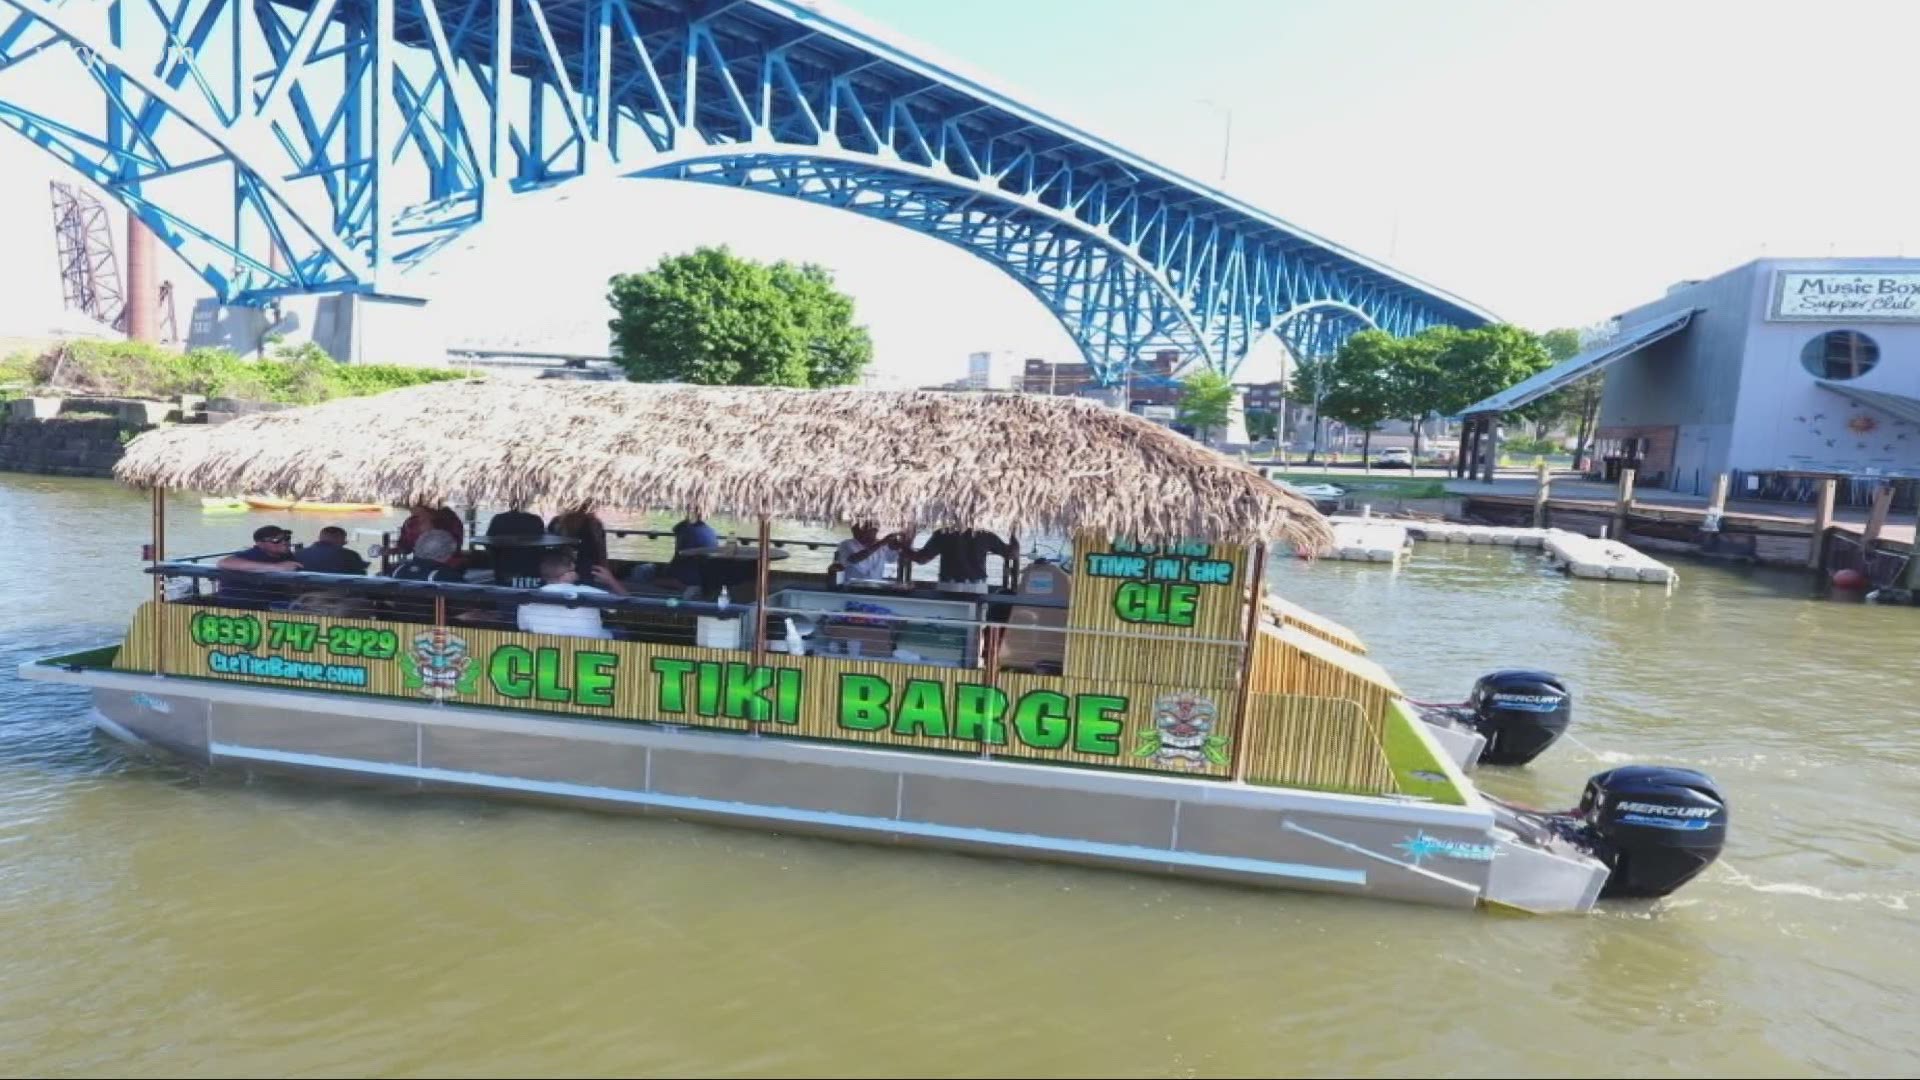 Cleveland's Tiki Barge Brings Fun & The Tropical Spirit to Town.